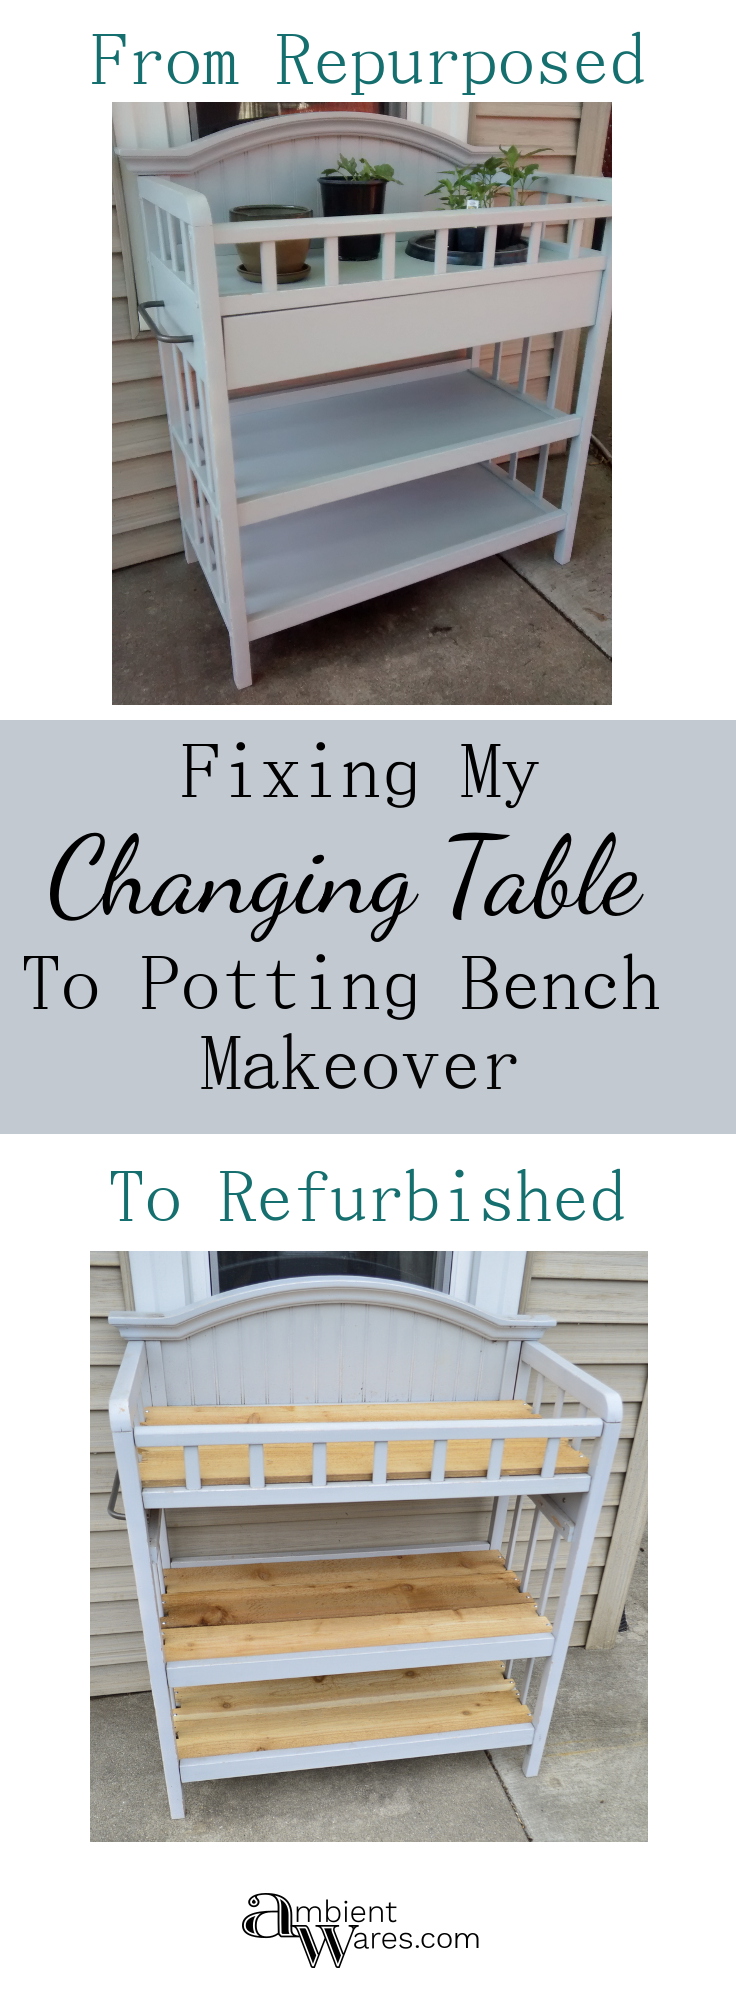 Refurbishing My Repurposed Potting Bench from an Old Changing Table - ambientwares.com